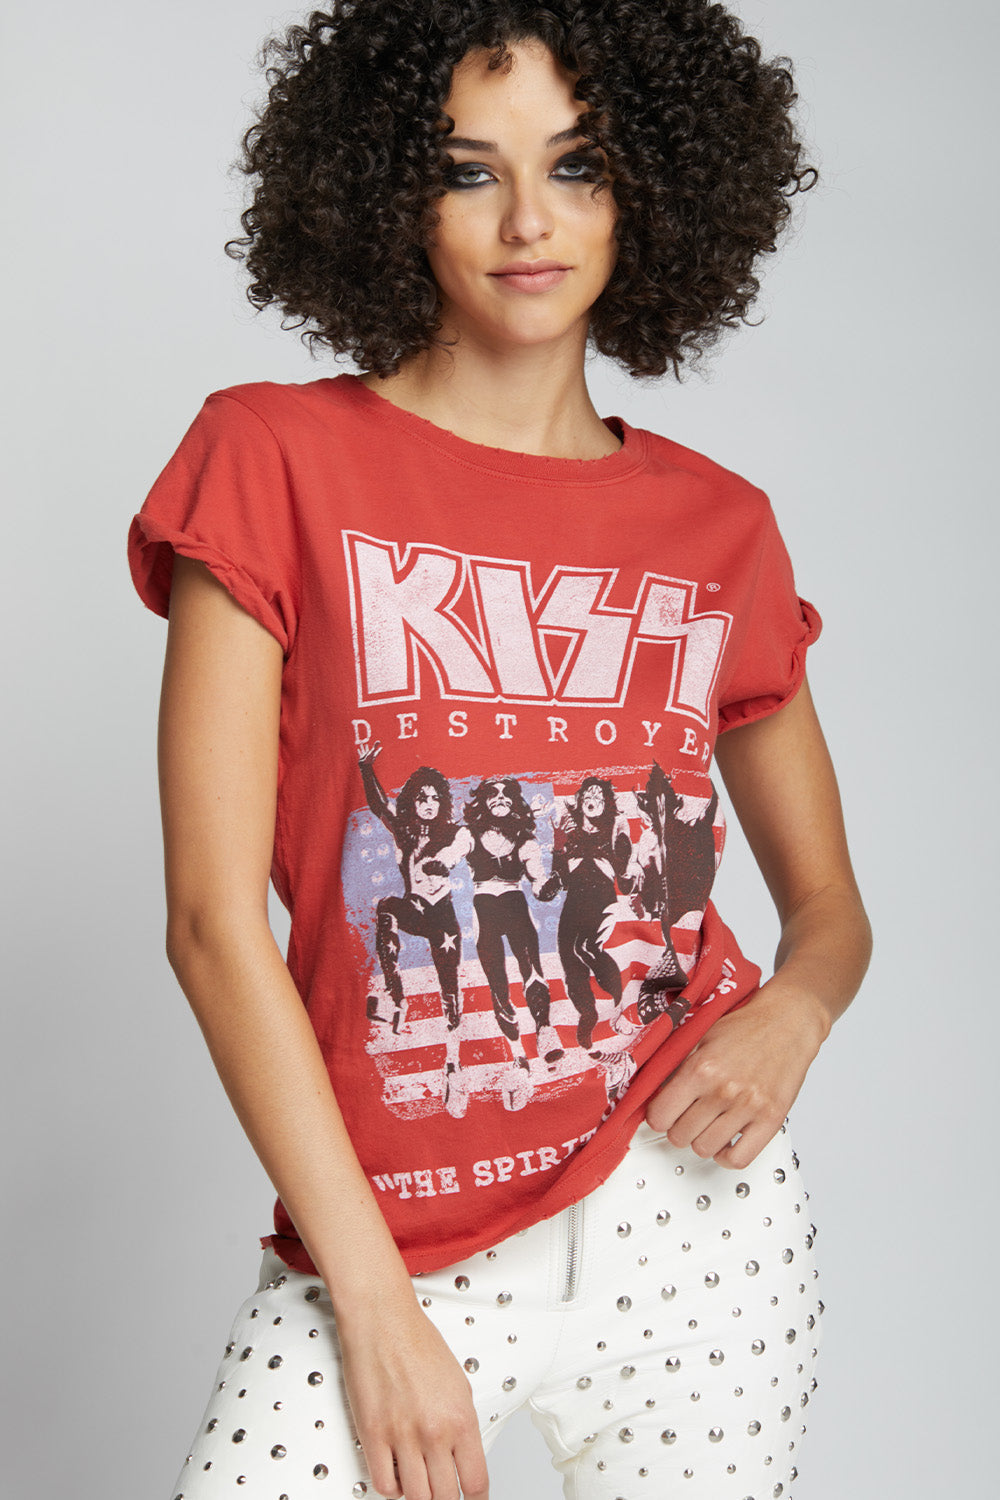 KISS Destroyer Tour Tee by Recycled Karma Brands